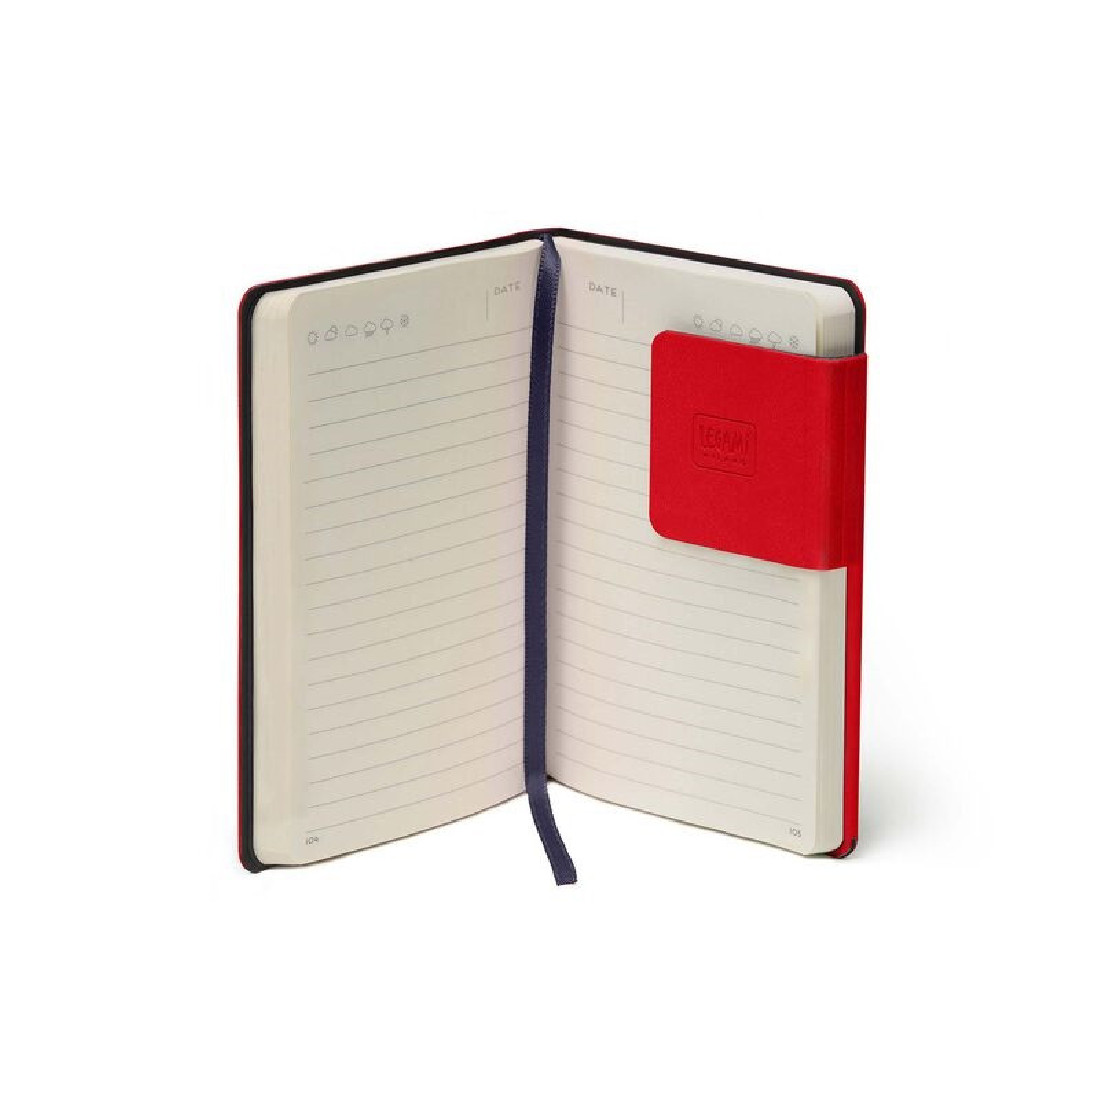 My Notebook - Lined - Small - Red Cover LEGAMI